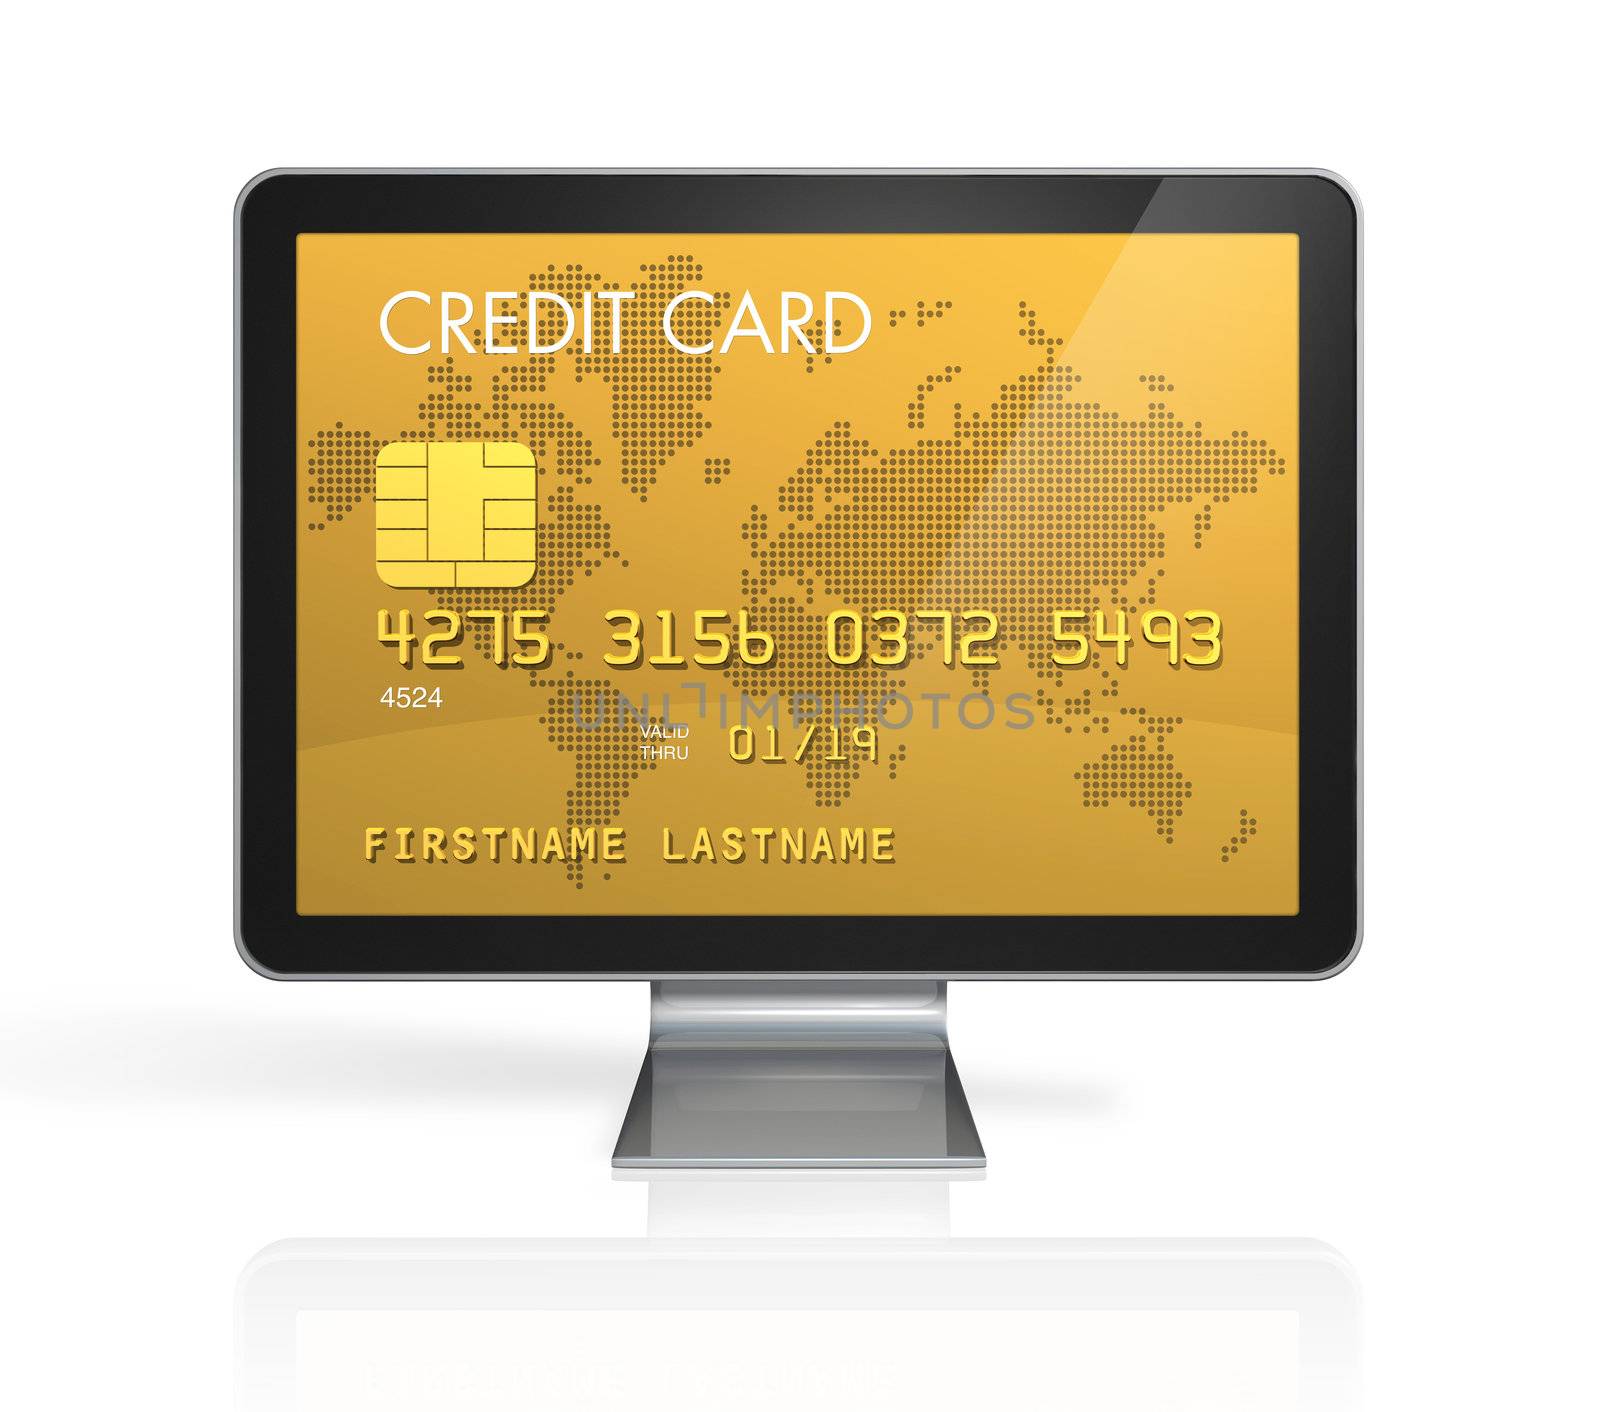 3D render of a gold credit card on a computer screen- isolated on white with 2 clipping paths : one for global scene and one for the screen